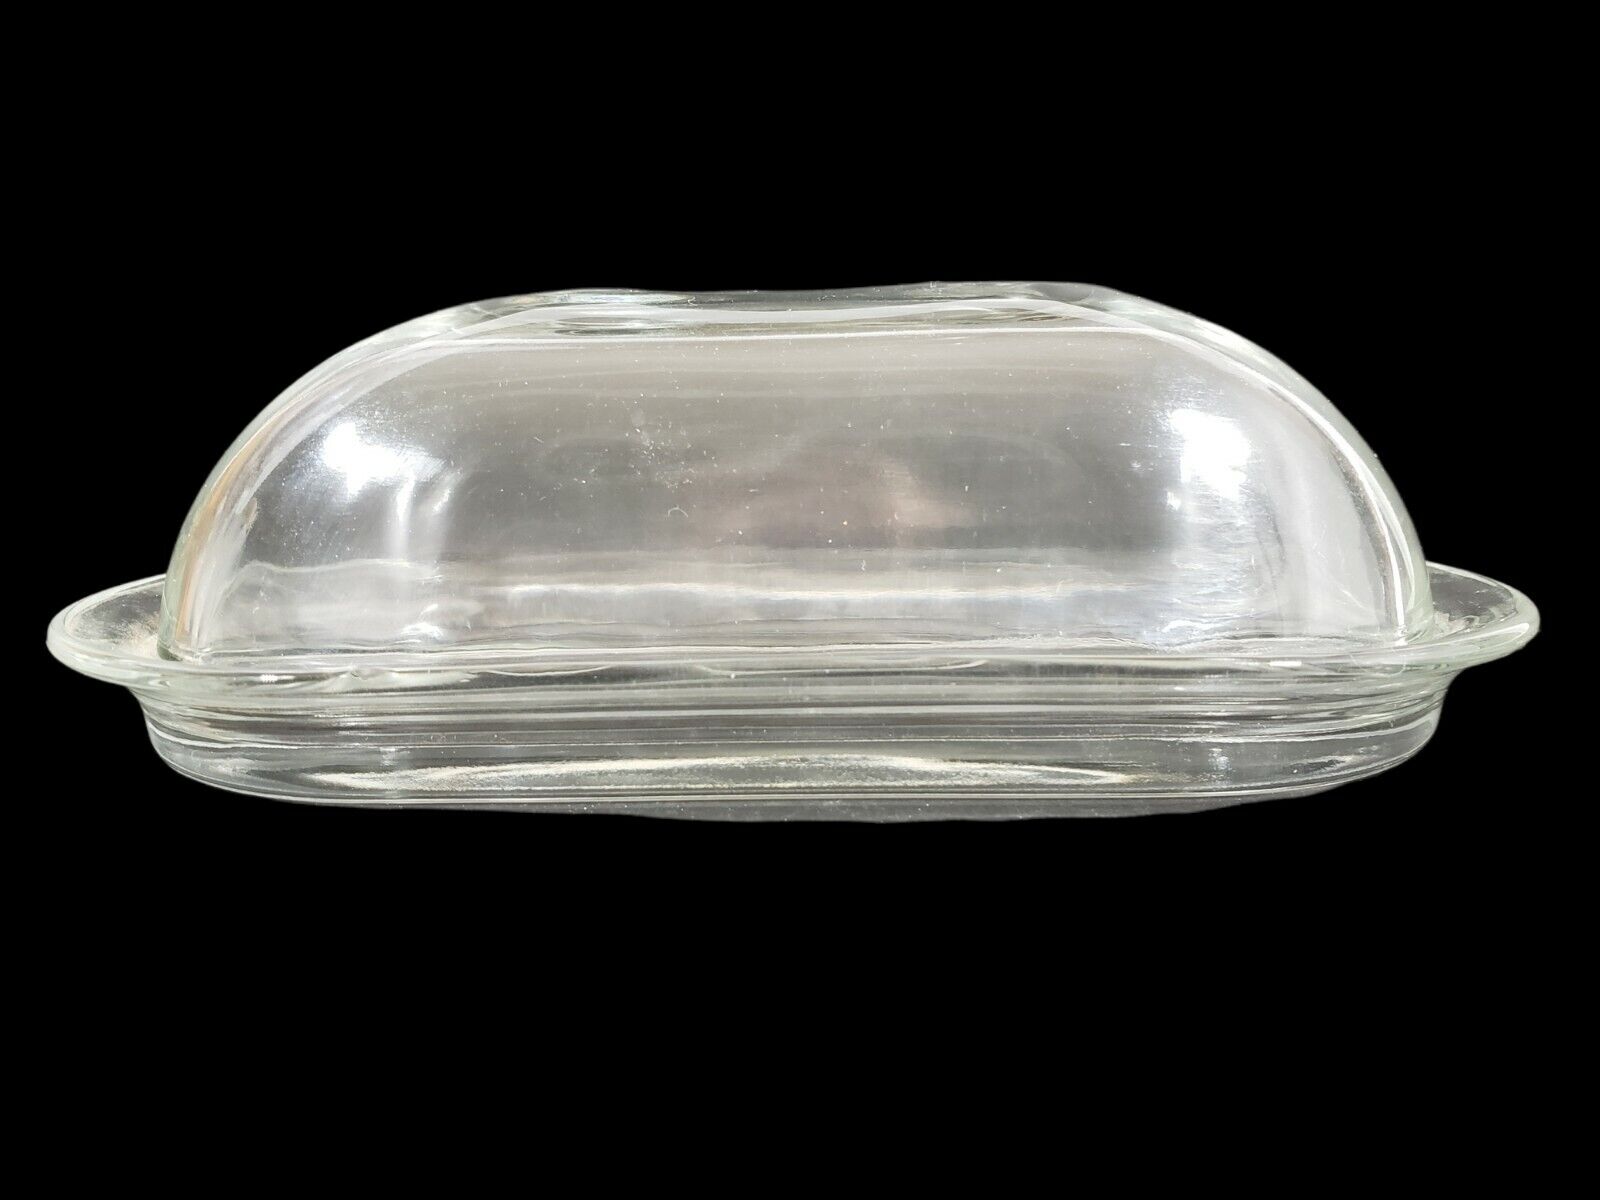 Unbranded Butter Dish Clear Smooth Glass 2 Piece Use With 1/4 Lb